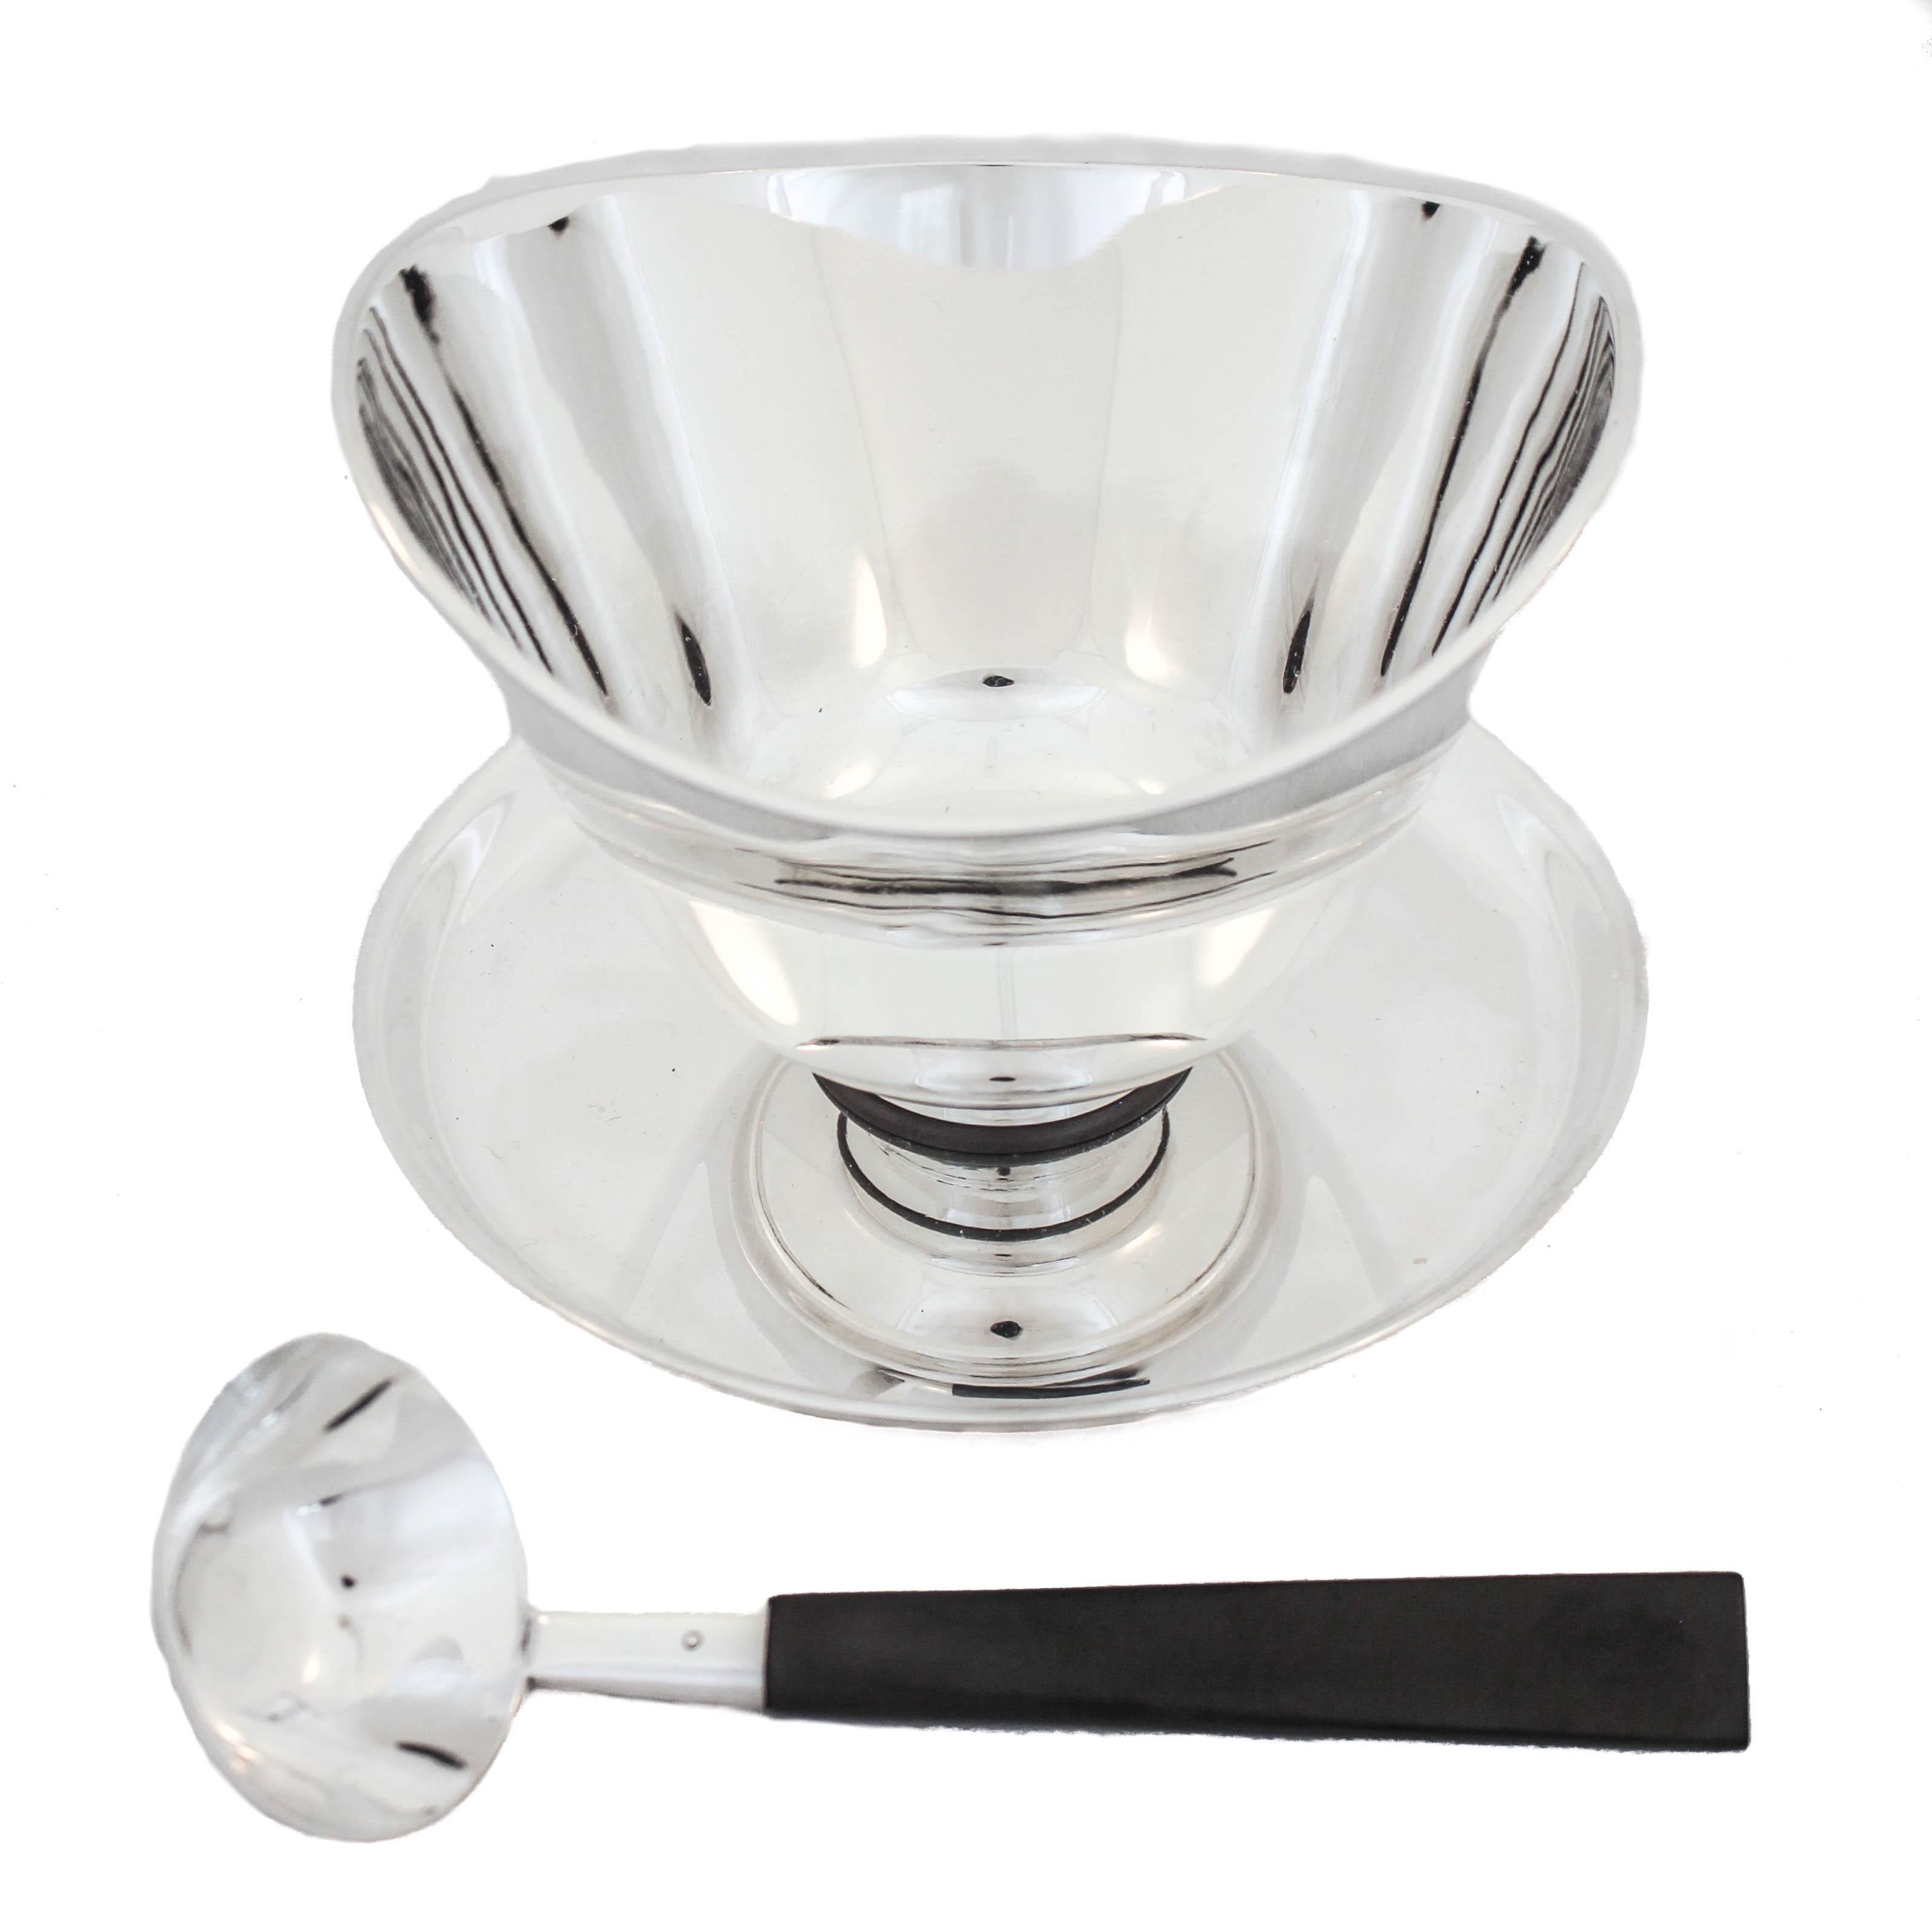 Being offered is a sterling silver sauce bowl with an attached under-tray and original ladle.  Made in Denmark in the 1950’s it has a quintessential Mid-Century simplicity and sleekness to it.  The form is modern and yet classic in that Scandinavian